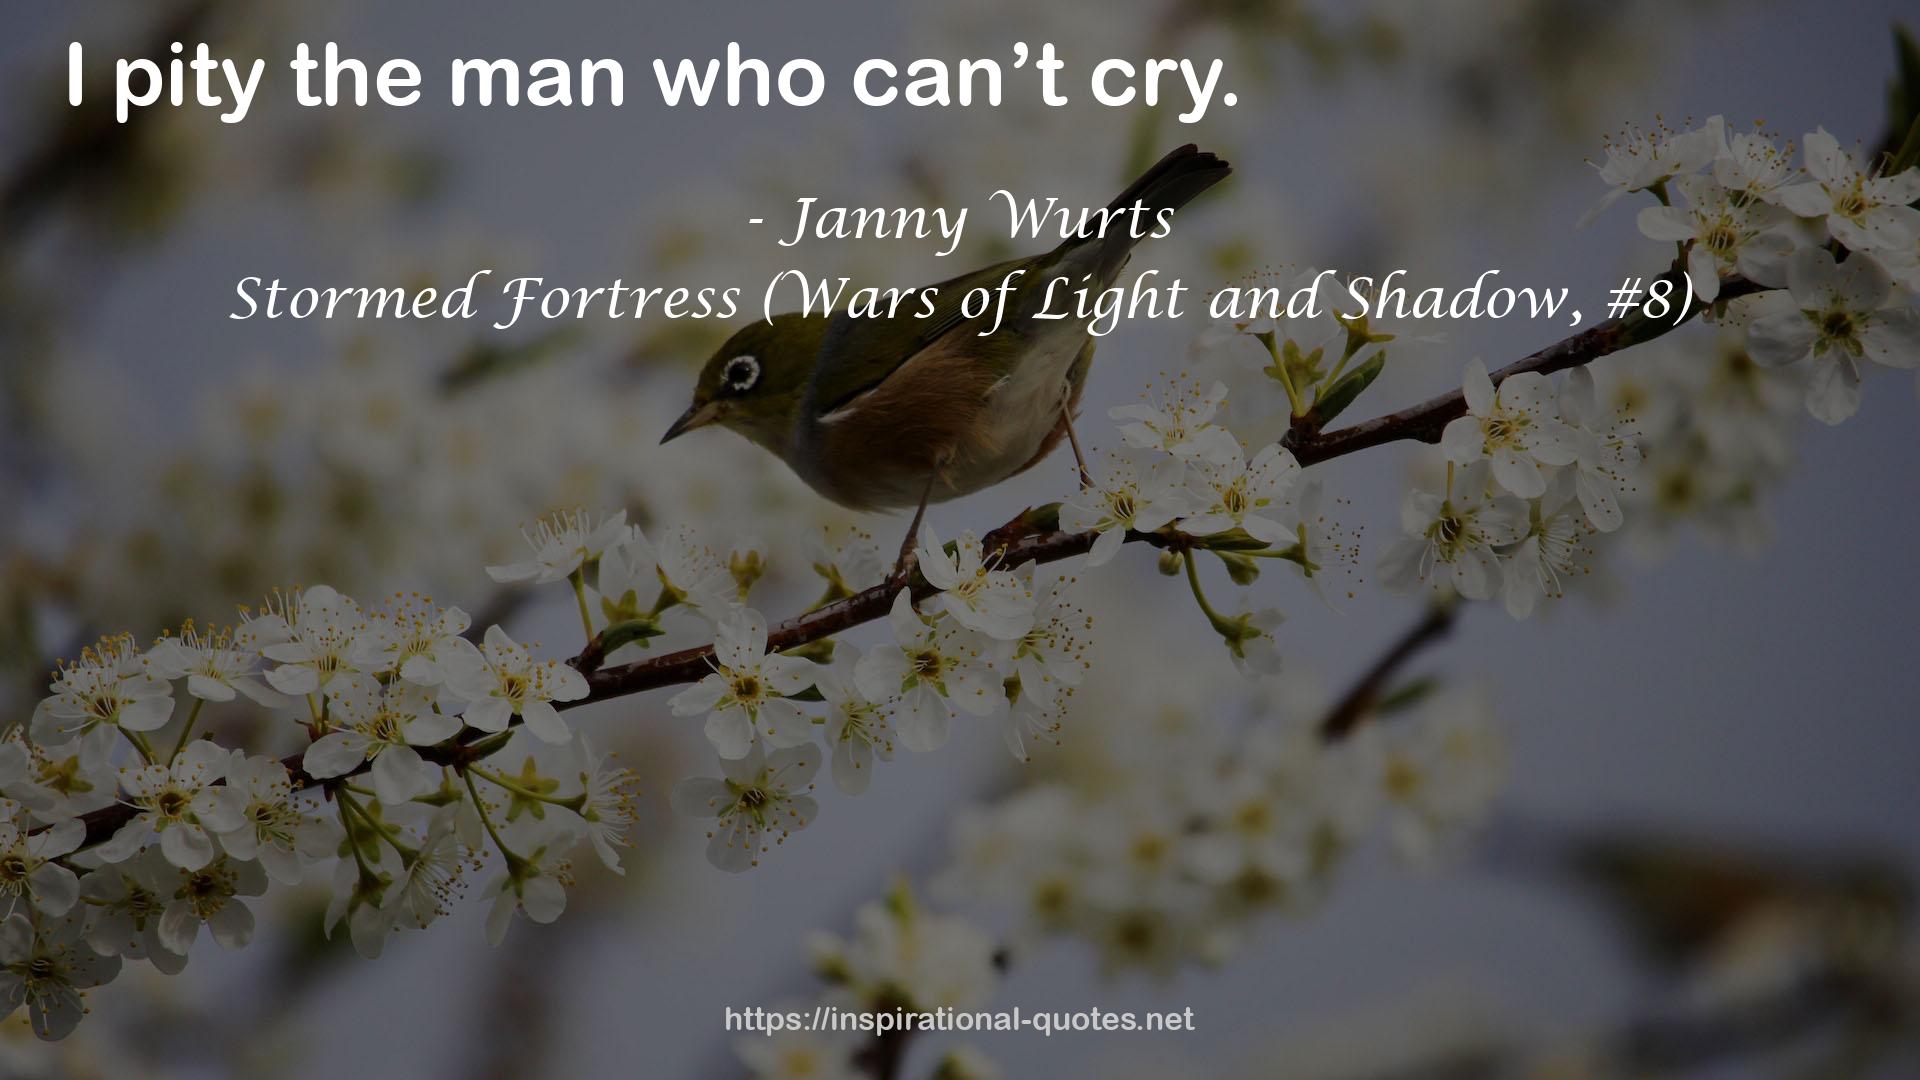 Janny Wurts QUOTES